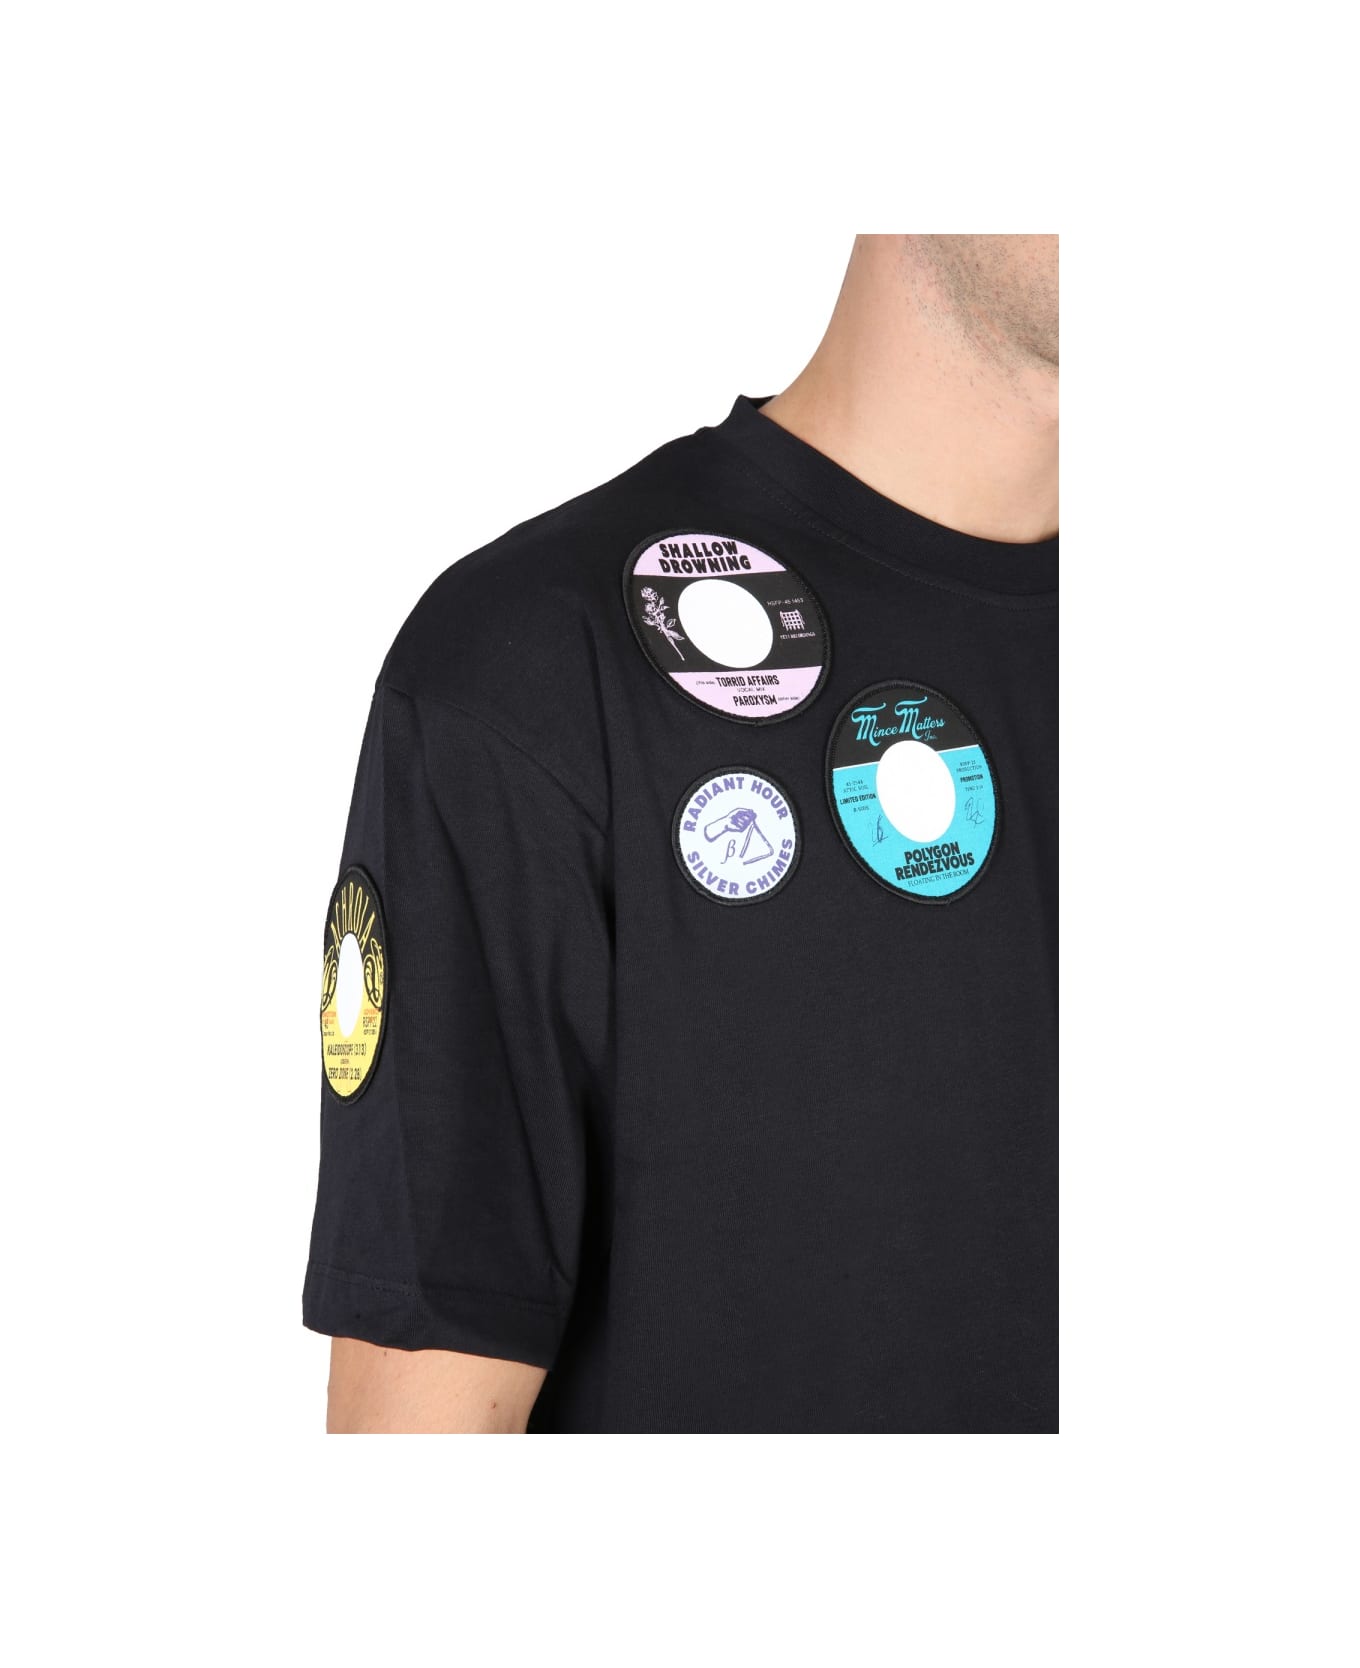 Fred Perry by Raf Simons Oversized T-shirt With Patch - BLACK